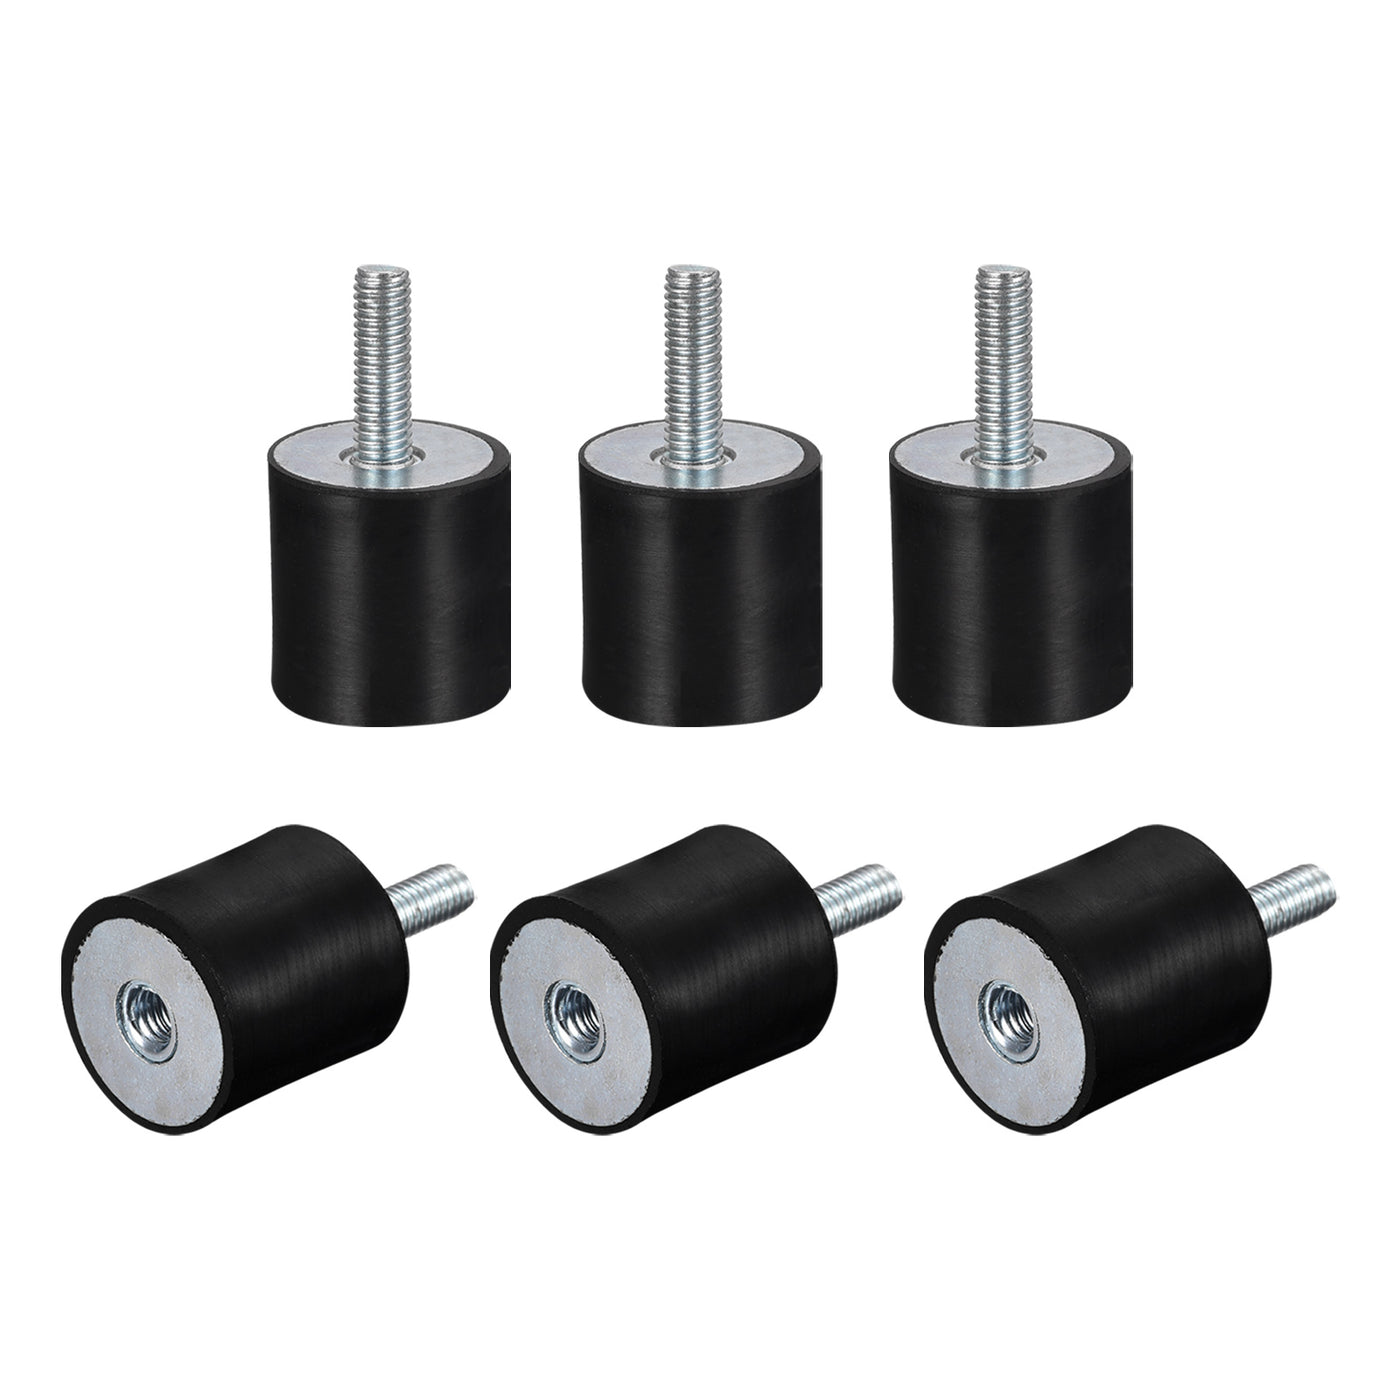 uxcell Uxcell Rubber Mount 6pcs M5 Male/Female Vibration Isolator Shock Absorber, D20mmxH20mm